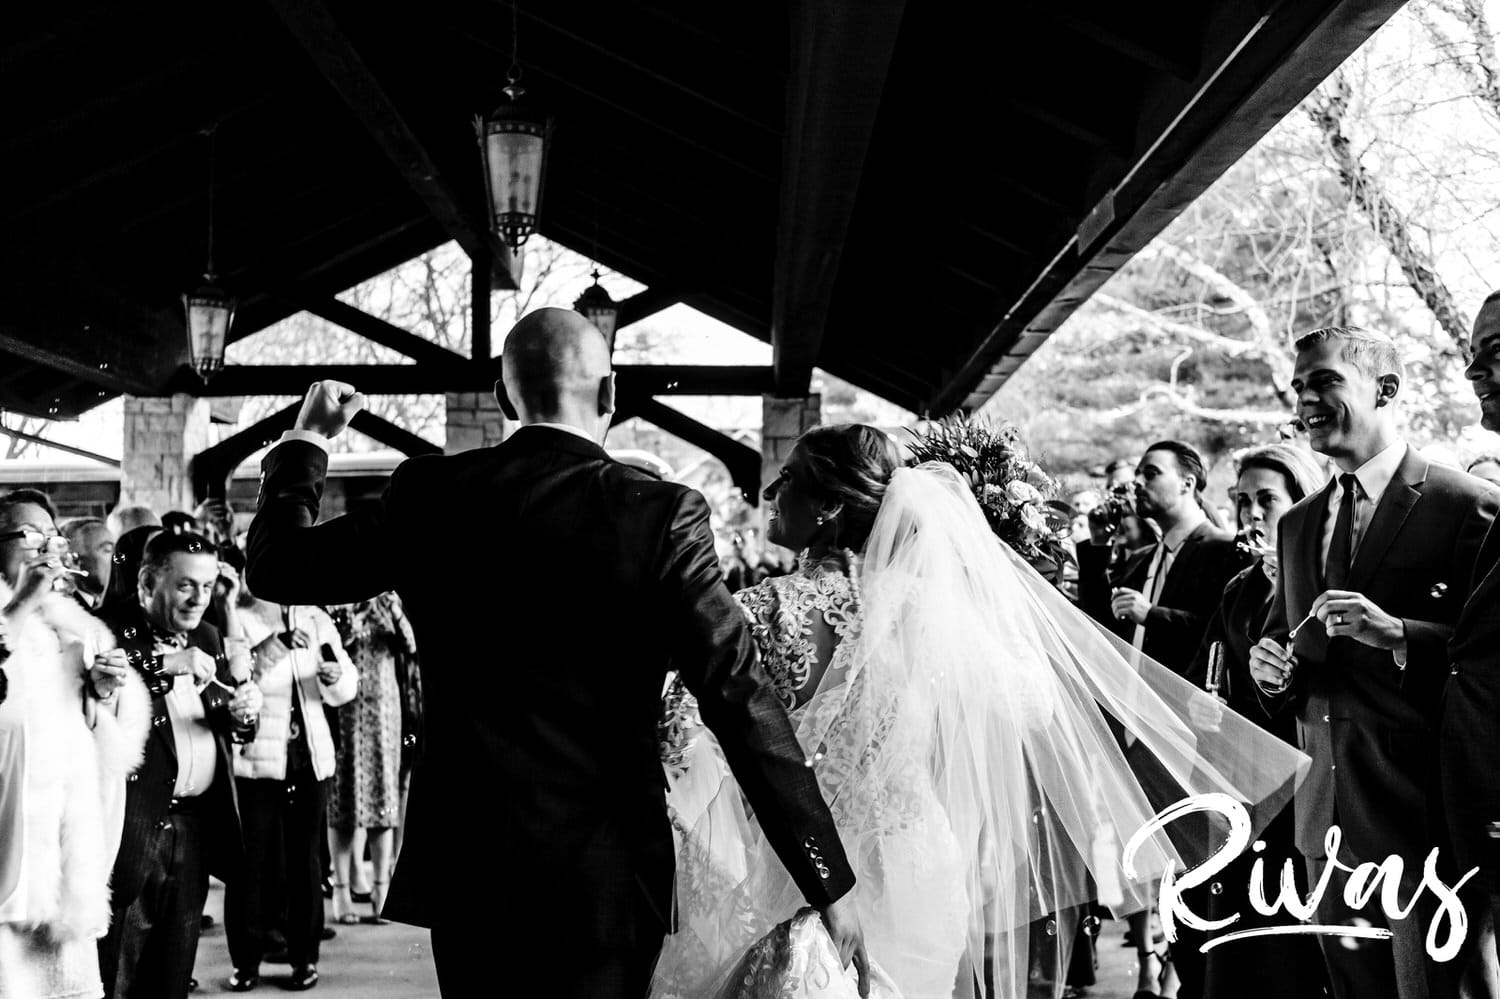 A candid black and white picture taken from behind of a bride looking lovingly up at her groom, celebrating his hands in celebration as they exit the church under a flurry of bubbles on their wedding day. 